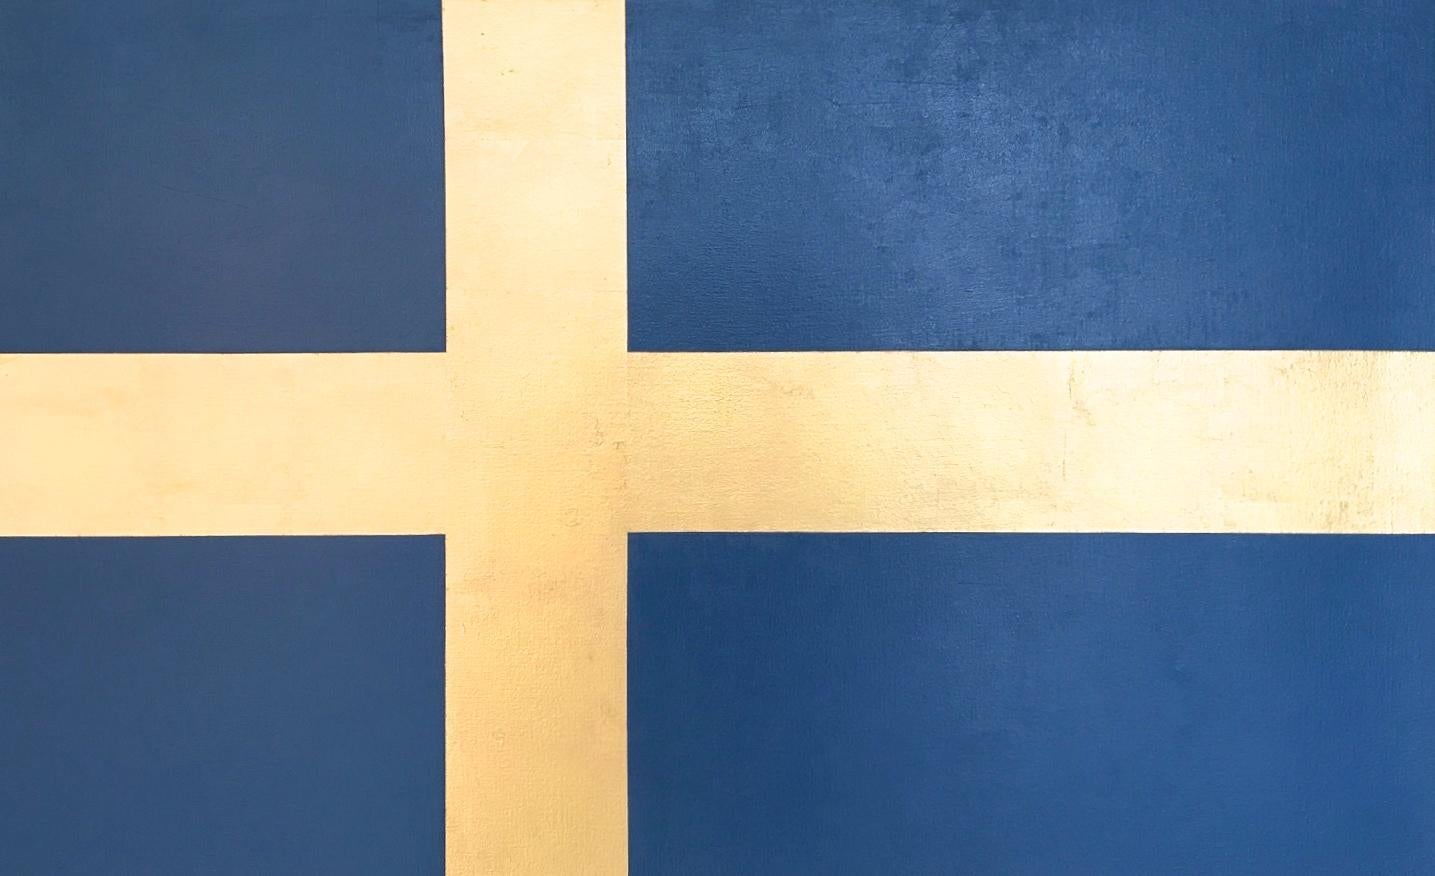 Charlotte Andry Gibbs Figurative Painting - "Flag of Sweden" Minimal Geometric Pop Art 23K Gold Leaf Contemporary Oil Paint